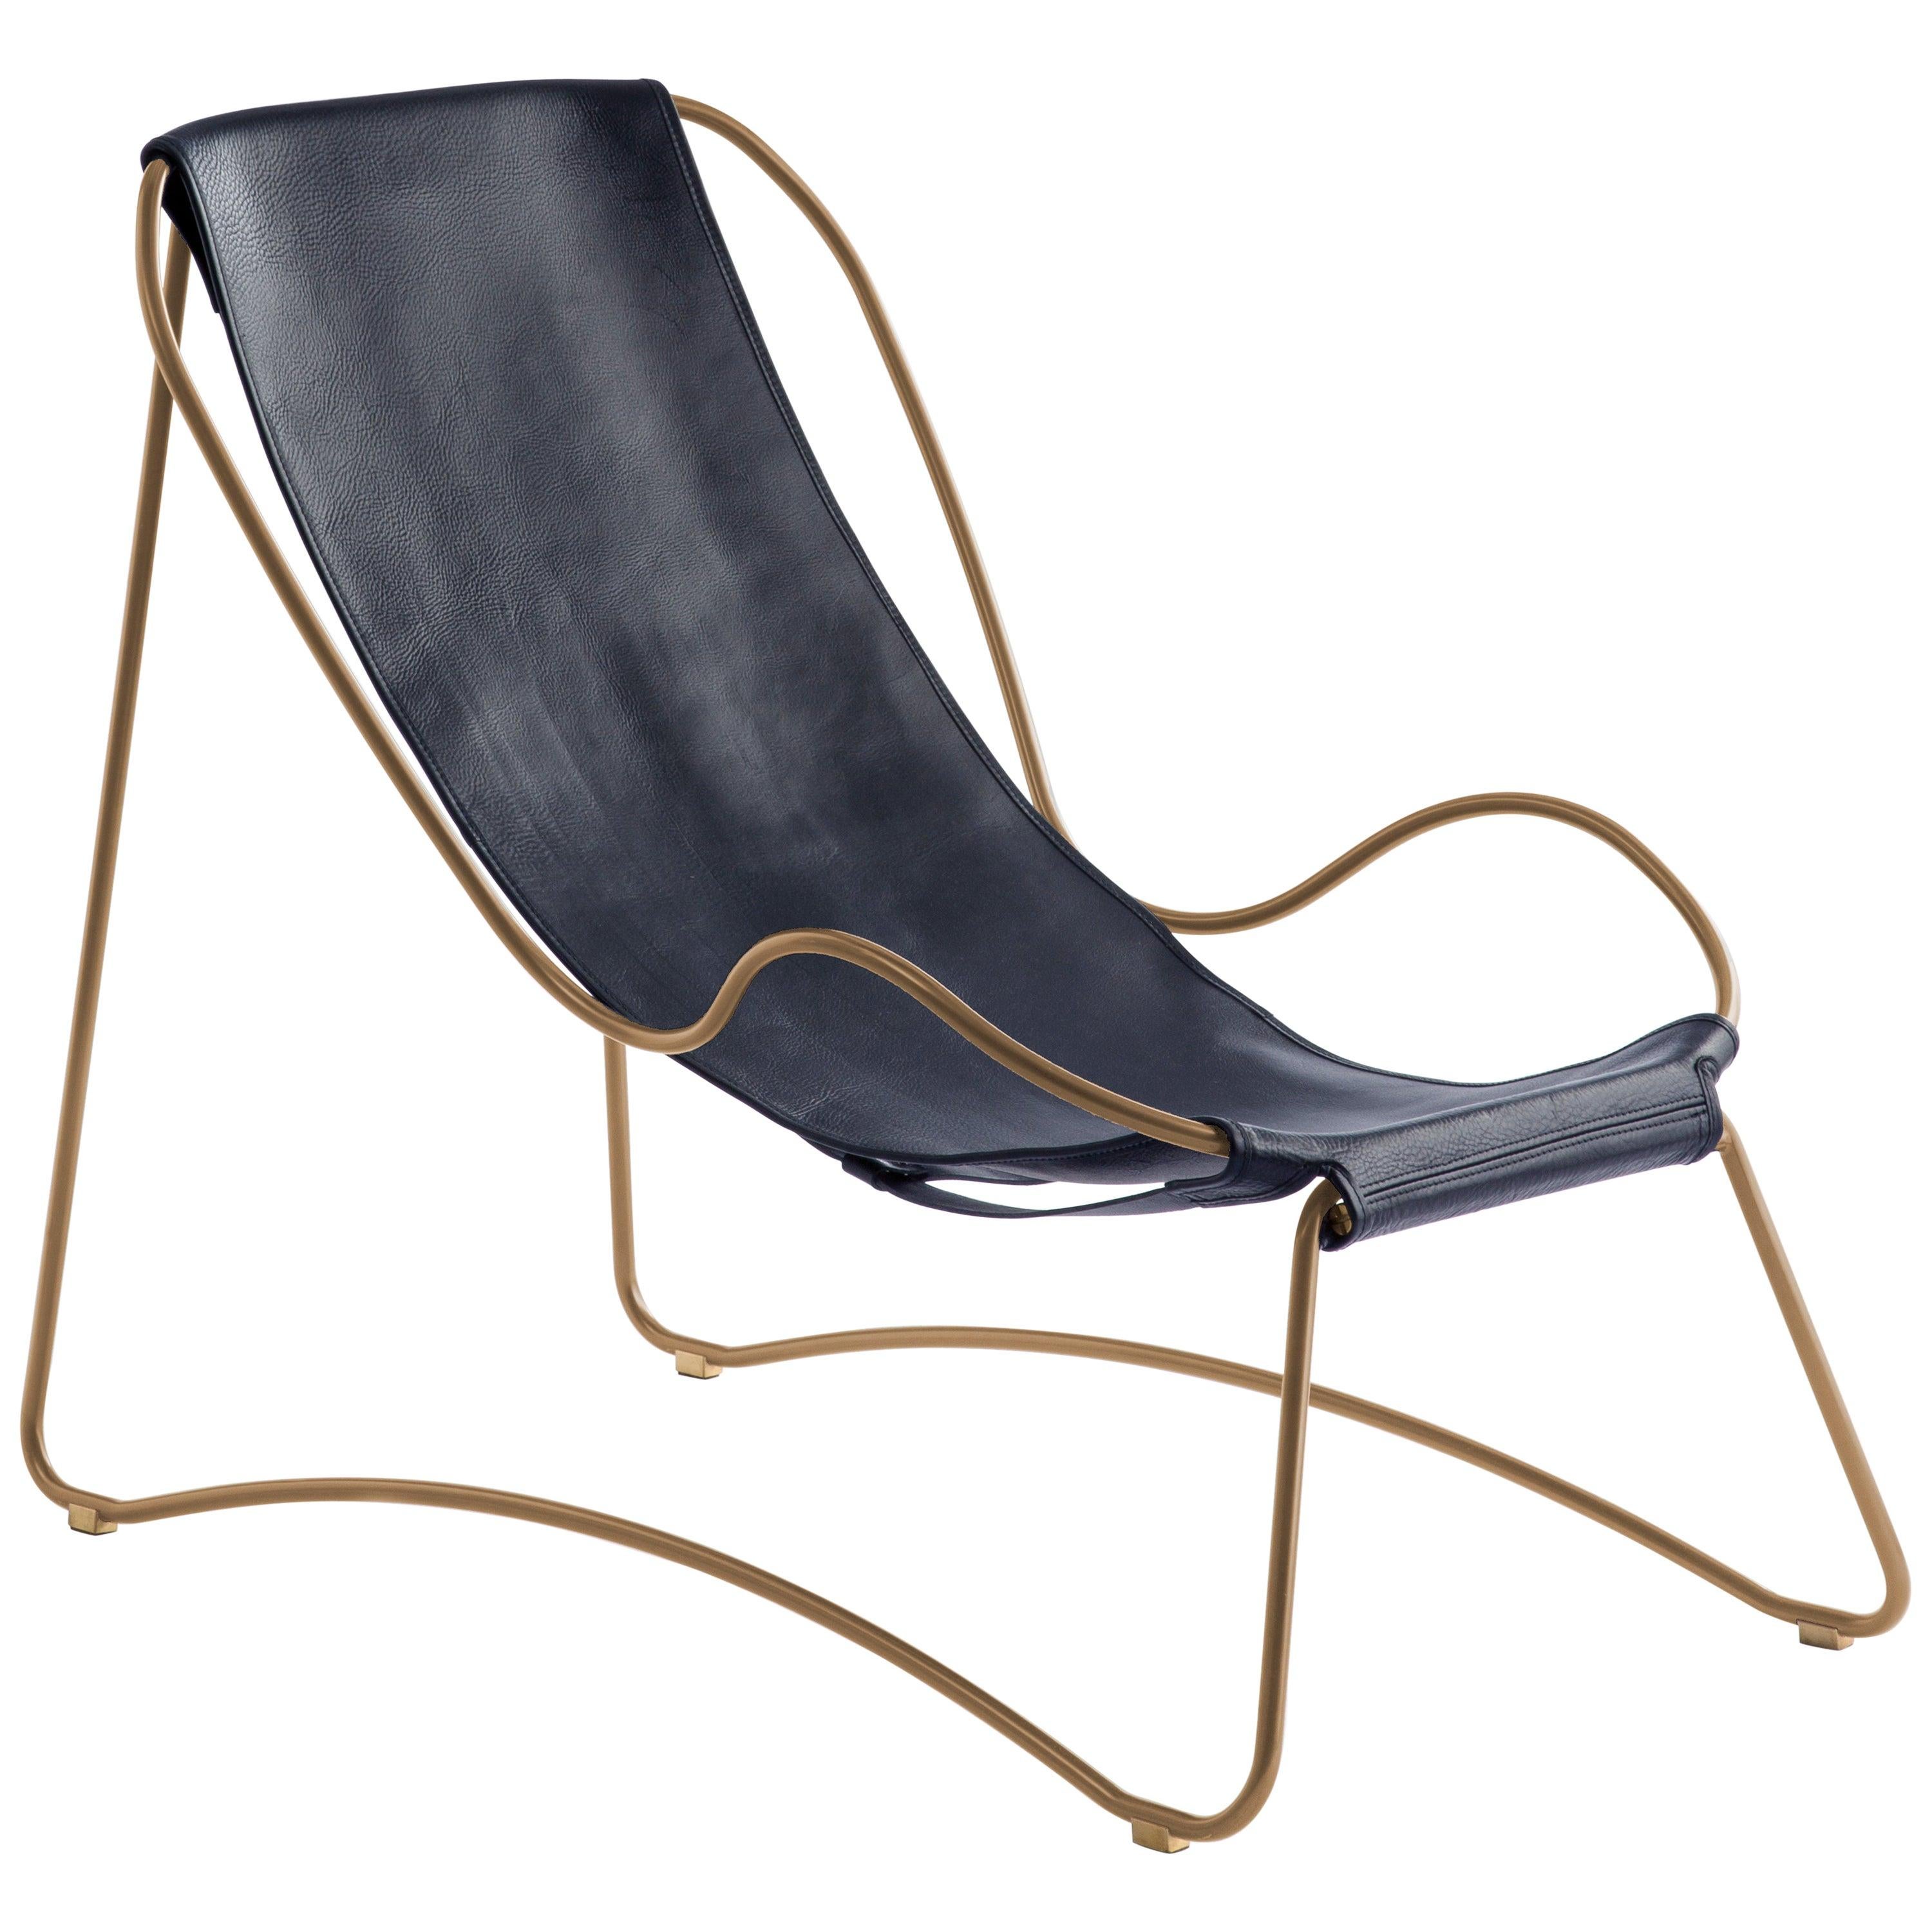 Sculptural Contemporary Chaise Lounge Aged Brass Metal, Navy Blue Leather Sample